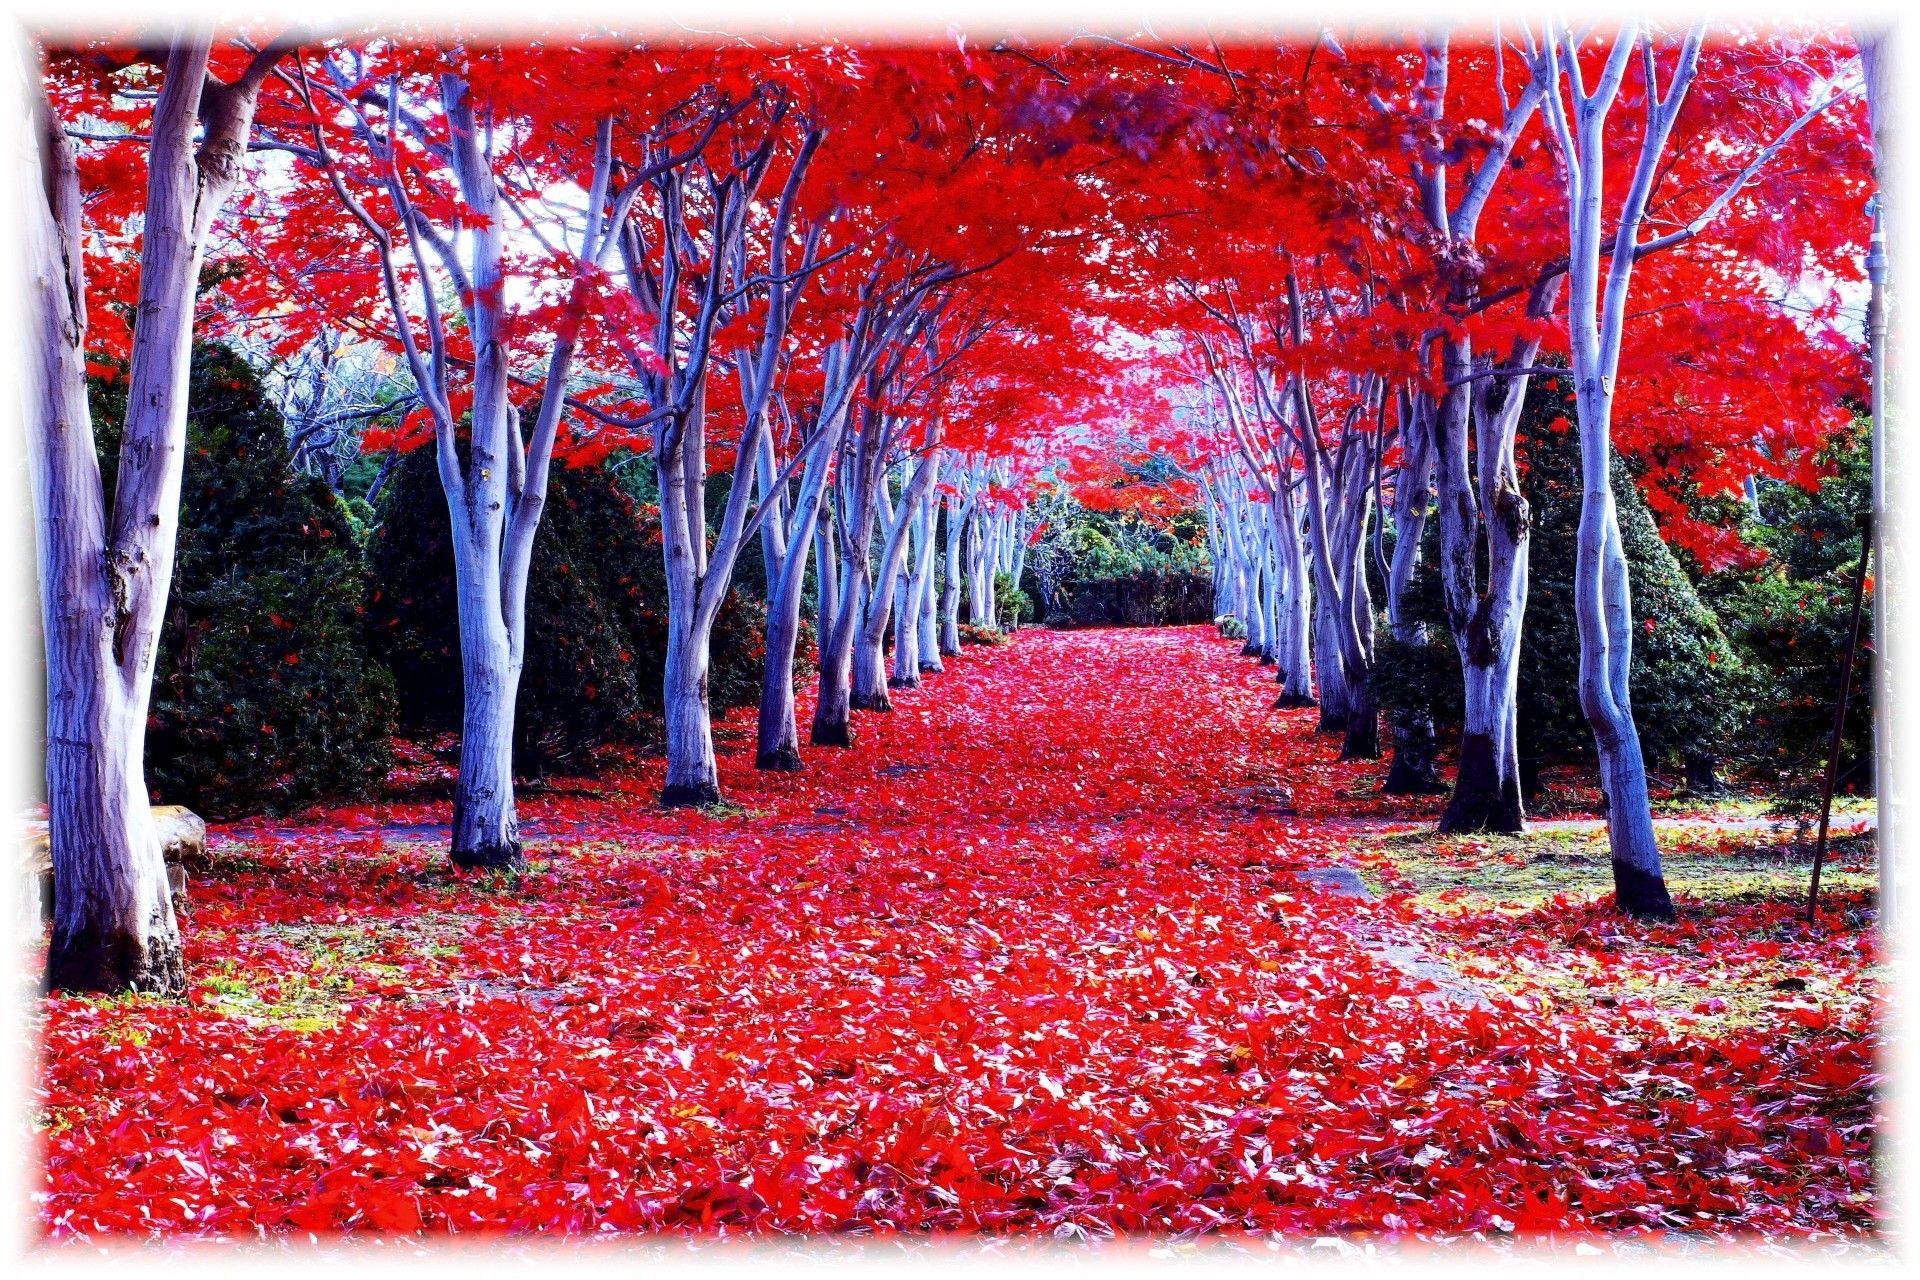 Red forest in a wonderful Autumn season - Beautiful Nature Landscapes Desktop Wallpaper. Awsome Landscape Wallpaper.. Autumn landscape, Hokkaido, Japan travel